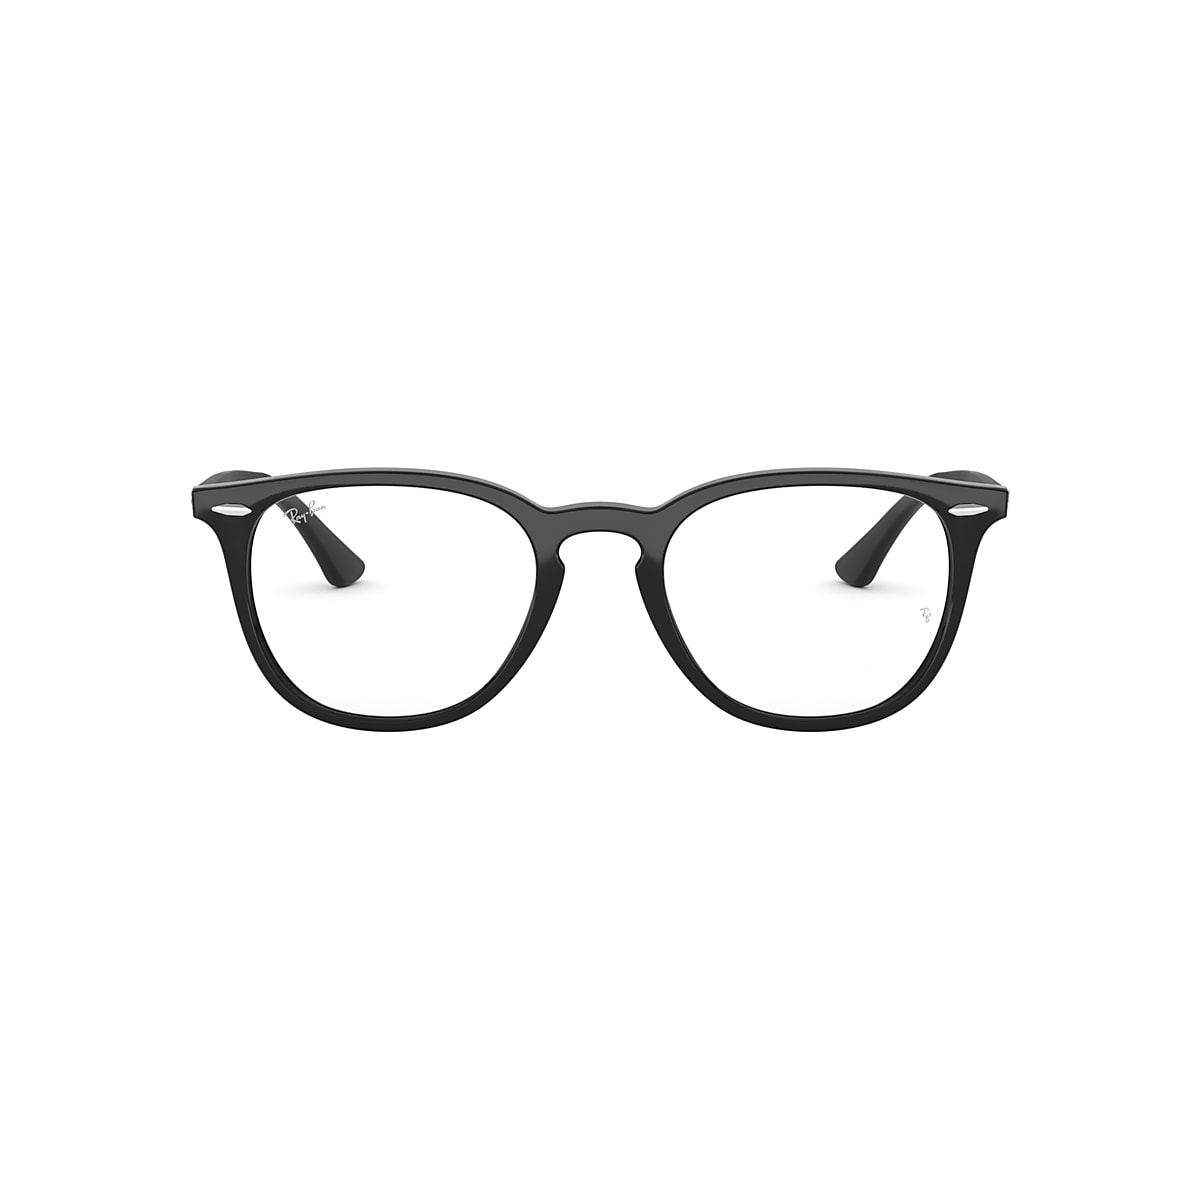 Ray-Ban 0RX7159 Glasses in Black | Target Optical